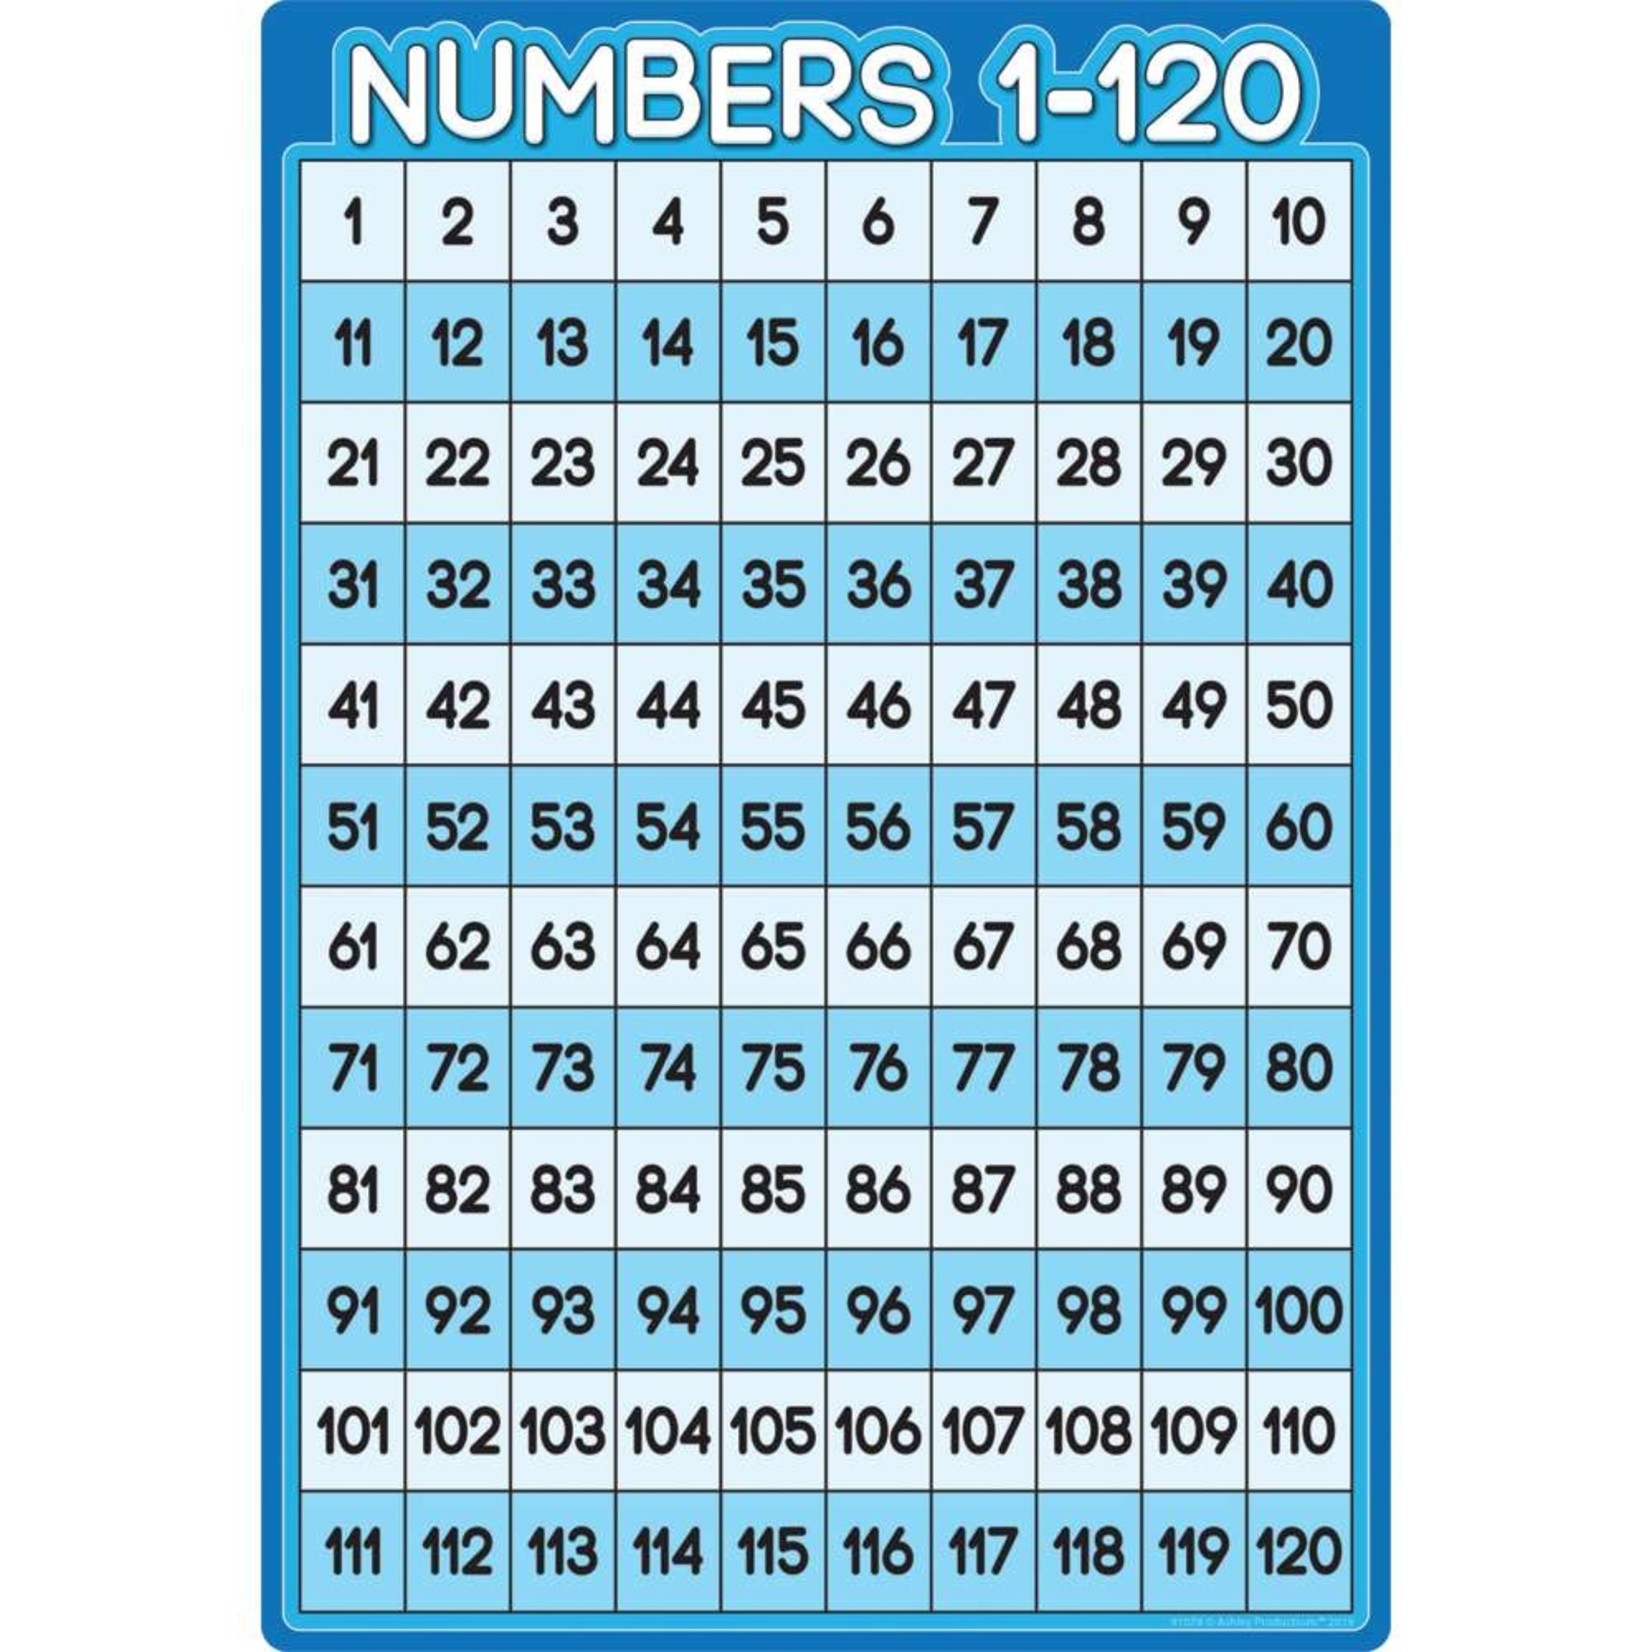 ASHLEY INCORPORATED Numbers 1-100 13" X 19" Smart Poly® Chart